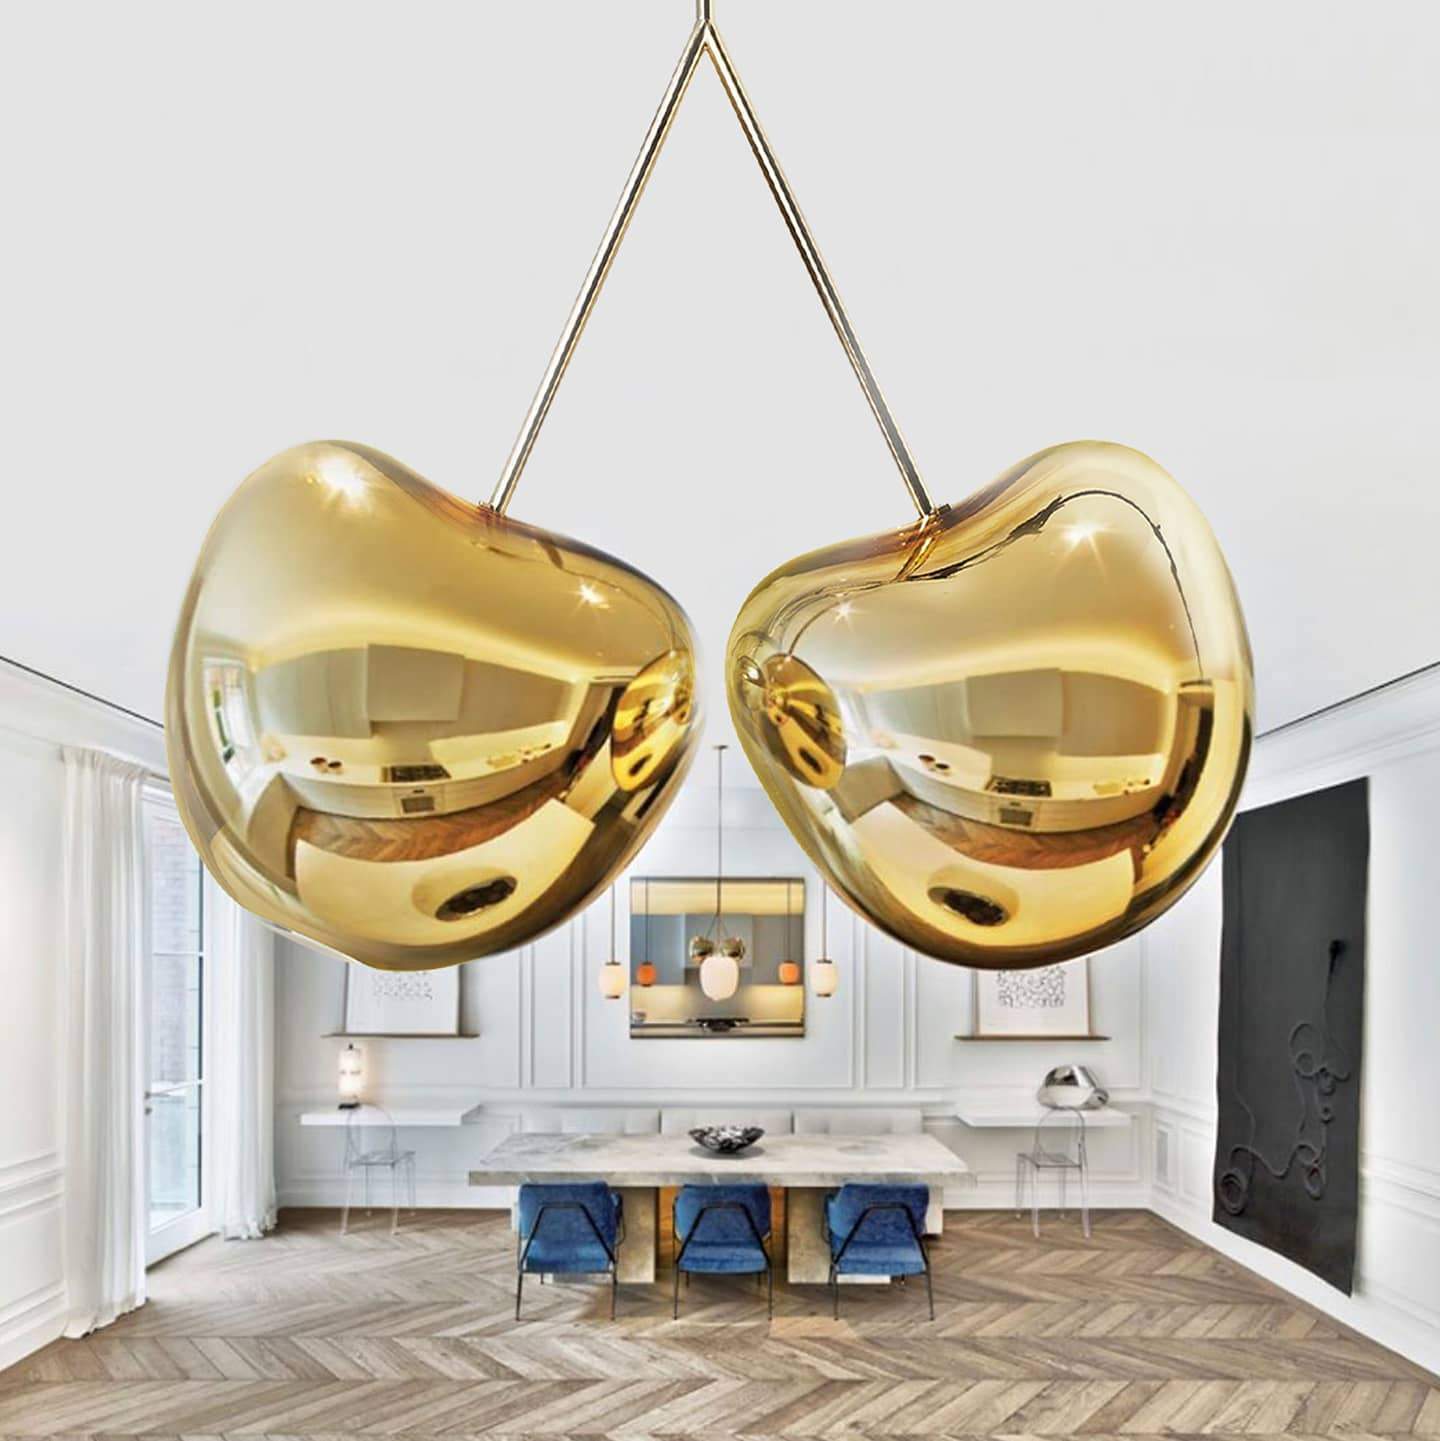 Cherry lamps from Qeeboo is a designer ceiling lamp, designed by Nina Zupanc. Intriguing, original and captivating shape. The metallic finish adds elegance. It will catch the eye of every guest, and its unusual design will be the icing on your cake.